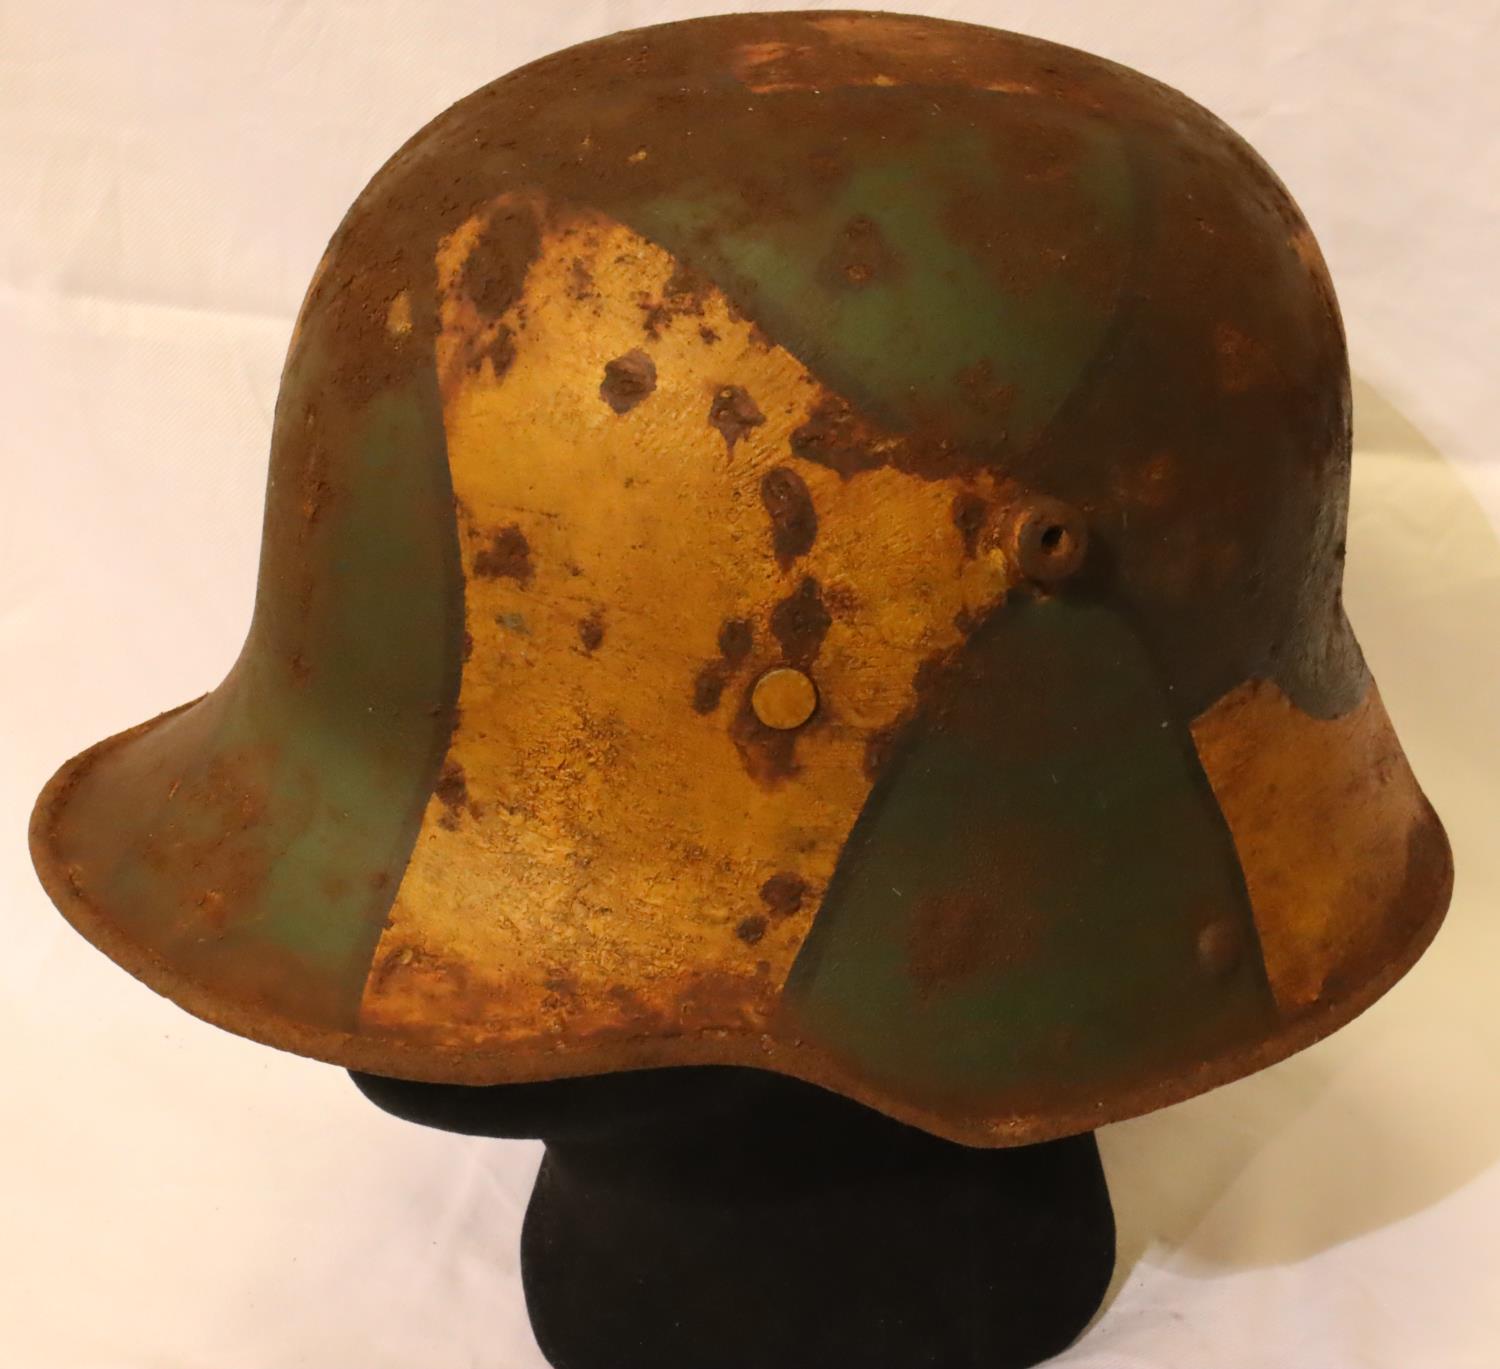 WWI 1916 German Stahlhelm helmet, painted in jigsaw pattern camouflage, complete with leather liner.